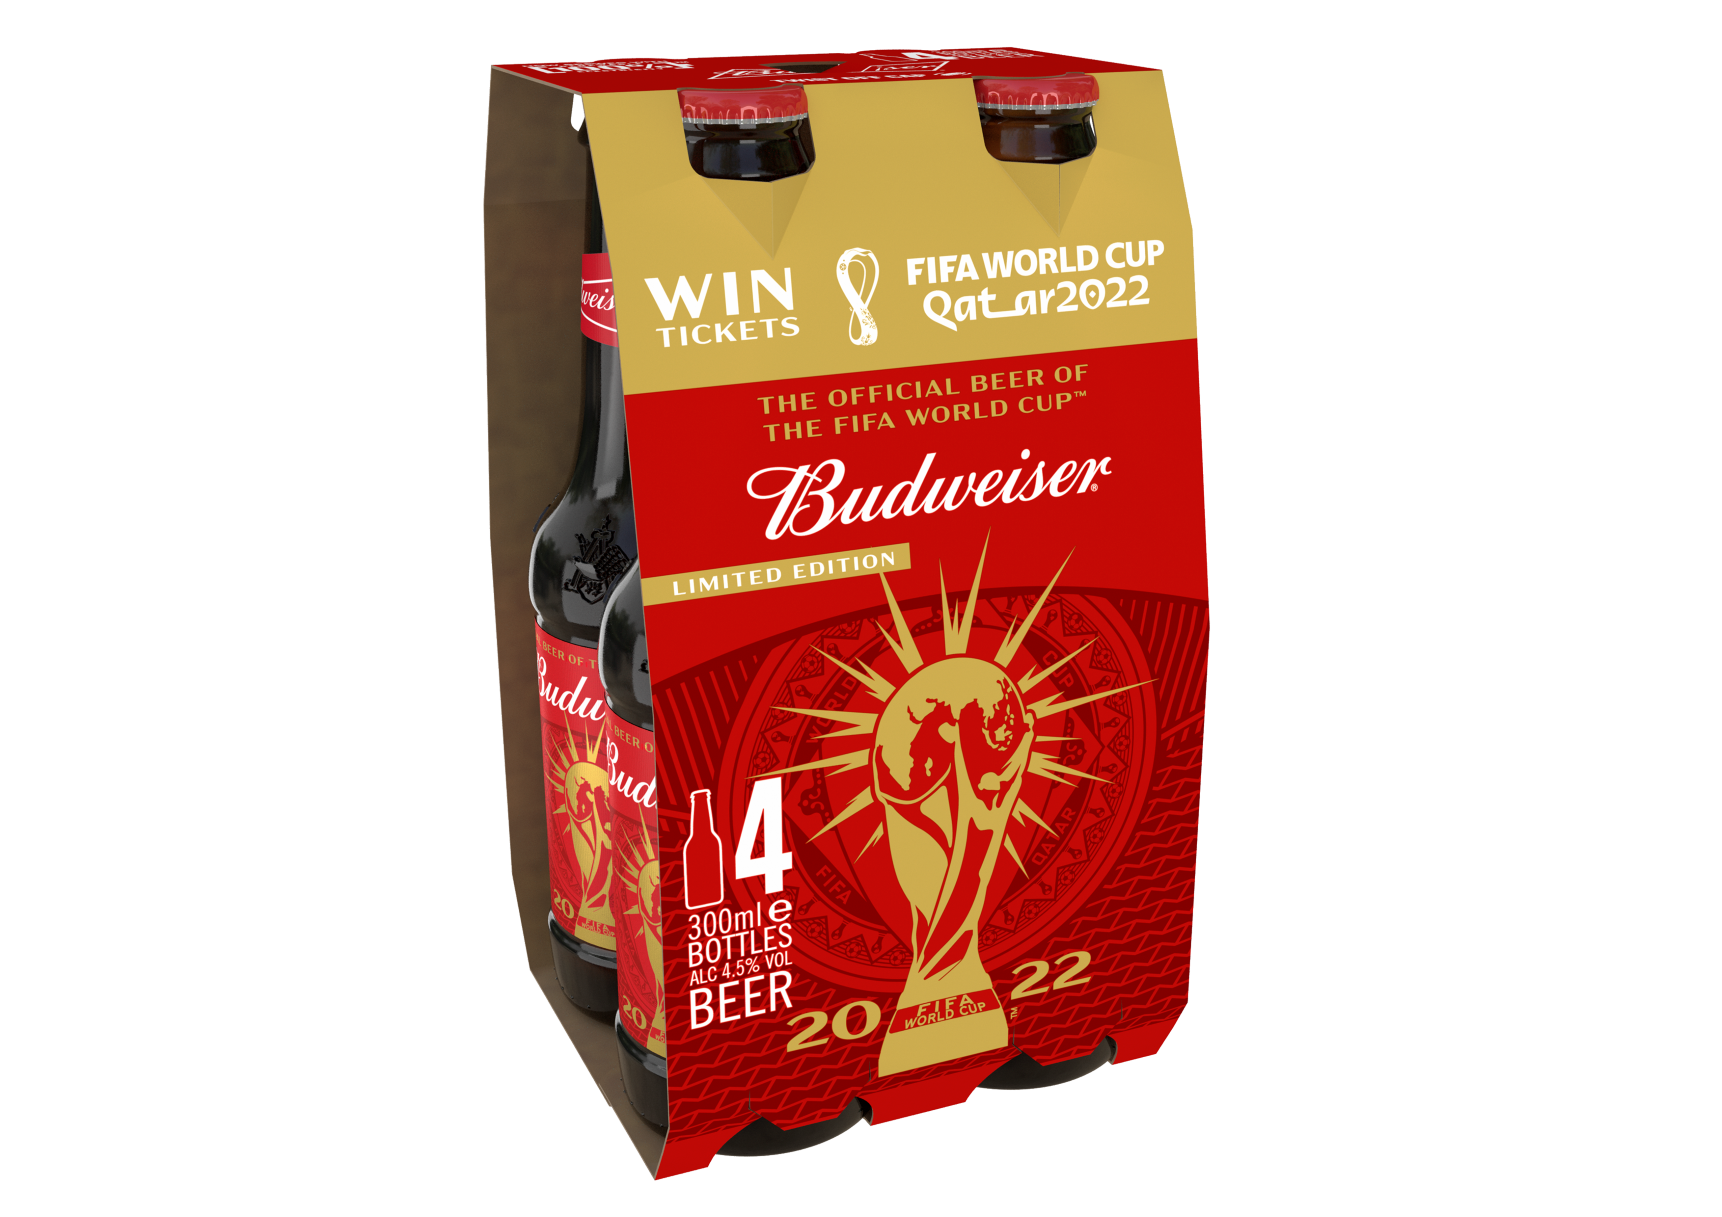 Budweiser kicks off World Cup with special packs